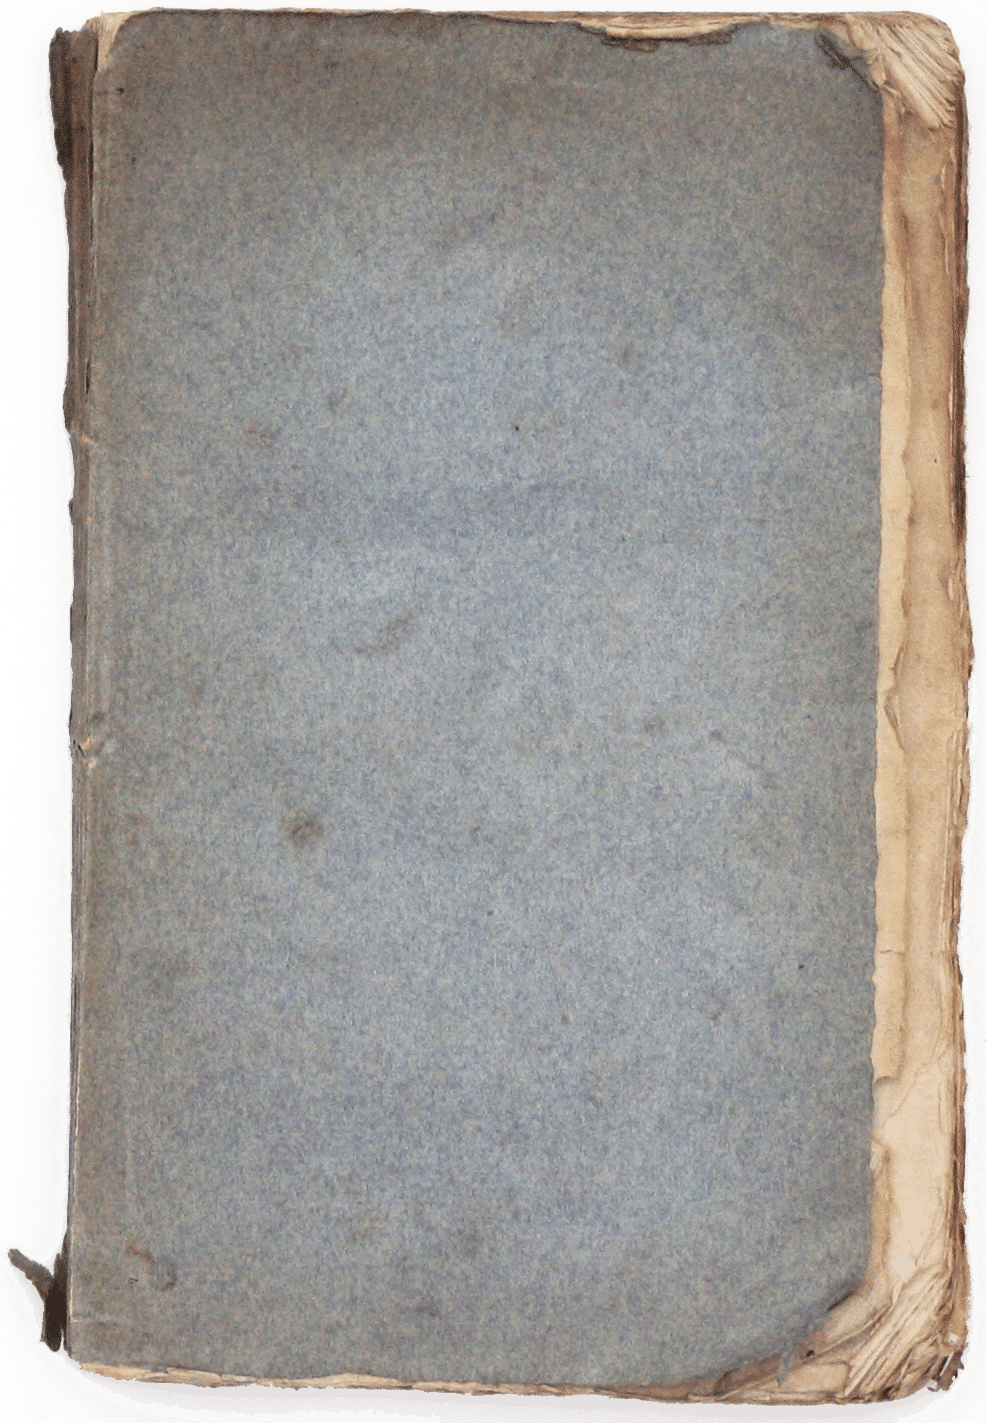 Paine’s Rights of Man, First French Edition